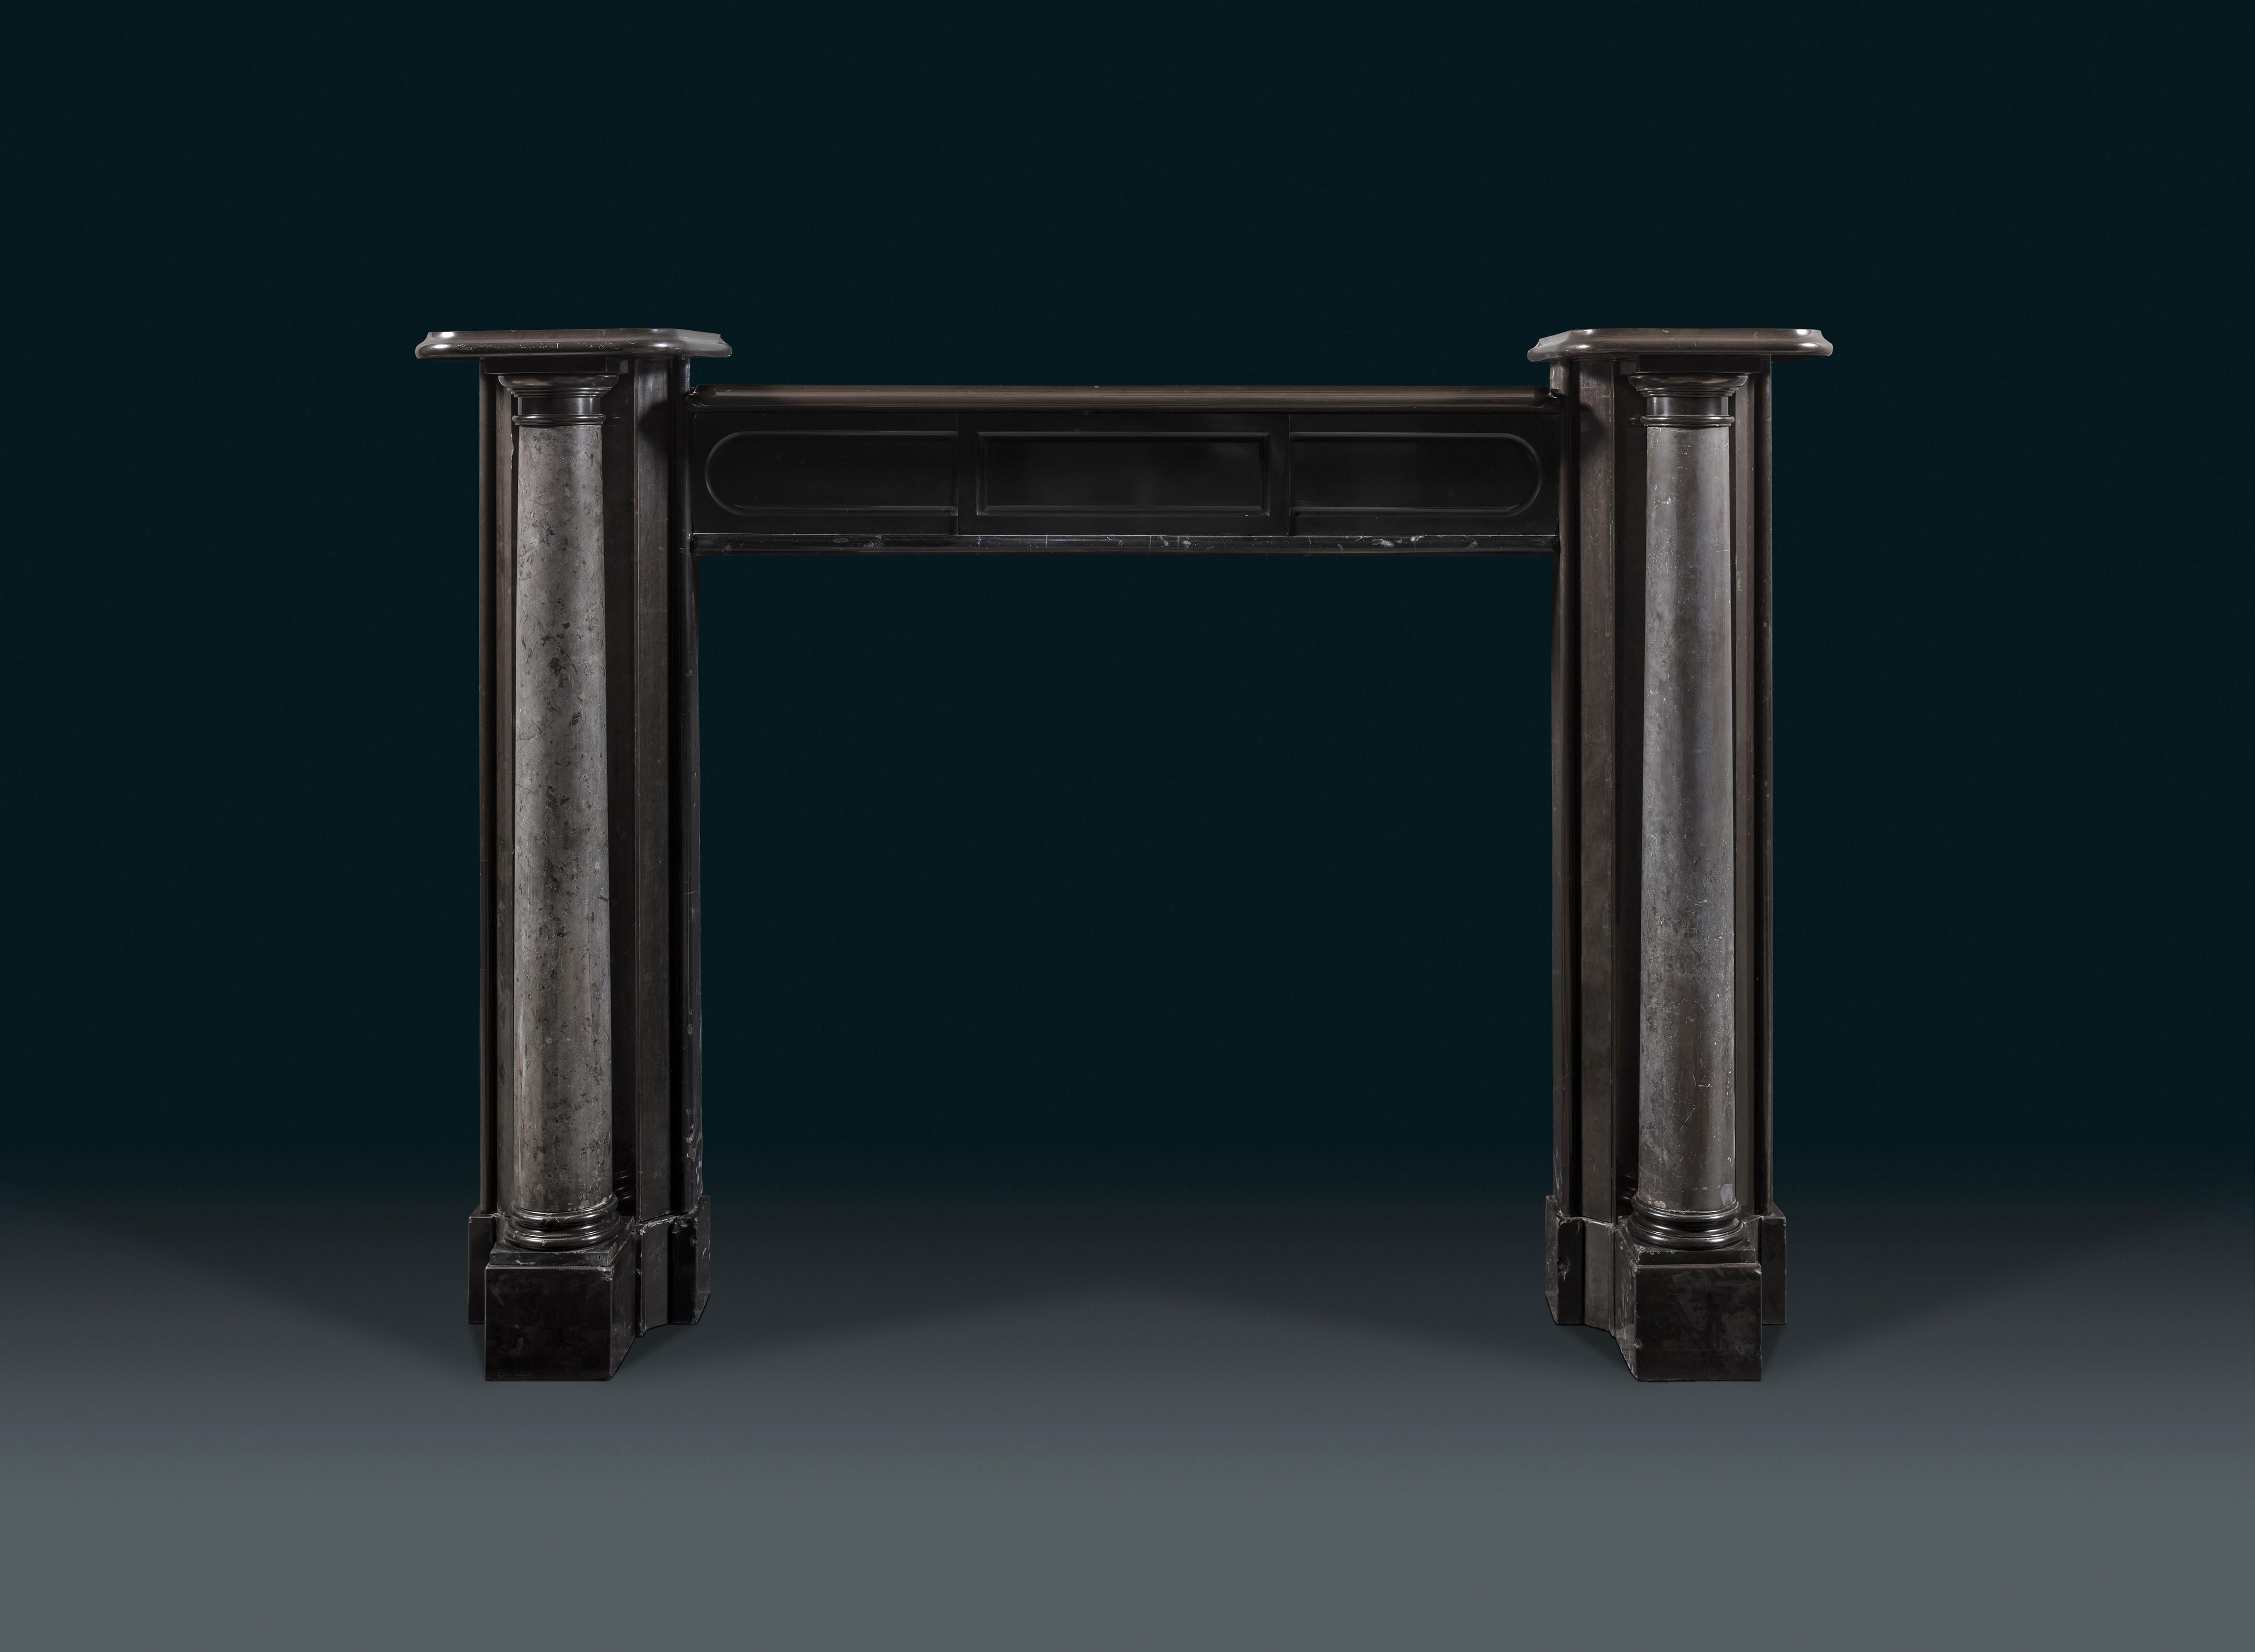 A highly unusual William IV column chimneypiece exhibiting fine European black marbles.
The body of this 19th century fireplace is carved from solid Belgium Black finished in a high polish, punctuated by tapering Doric columns that are unpolished,